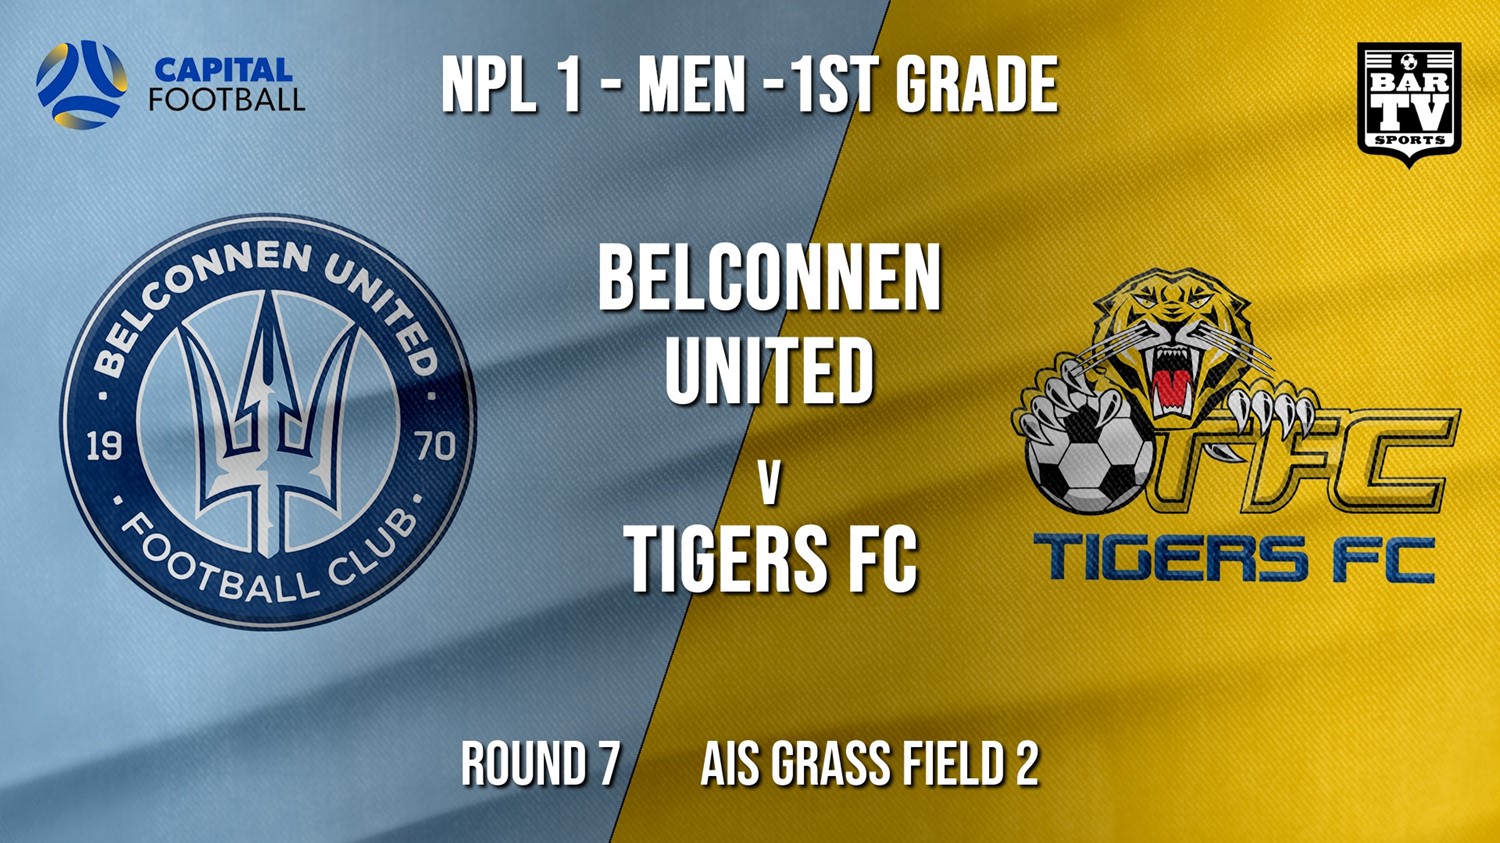 NPL - CAPITAL Round 7 - Belconnen United v Tigers FC Minigame Slate Image